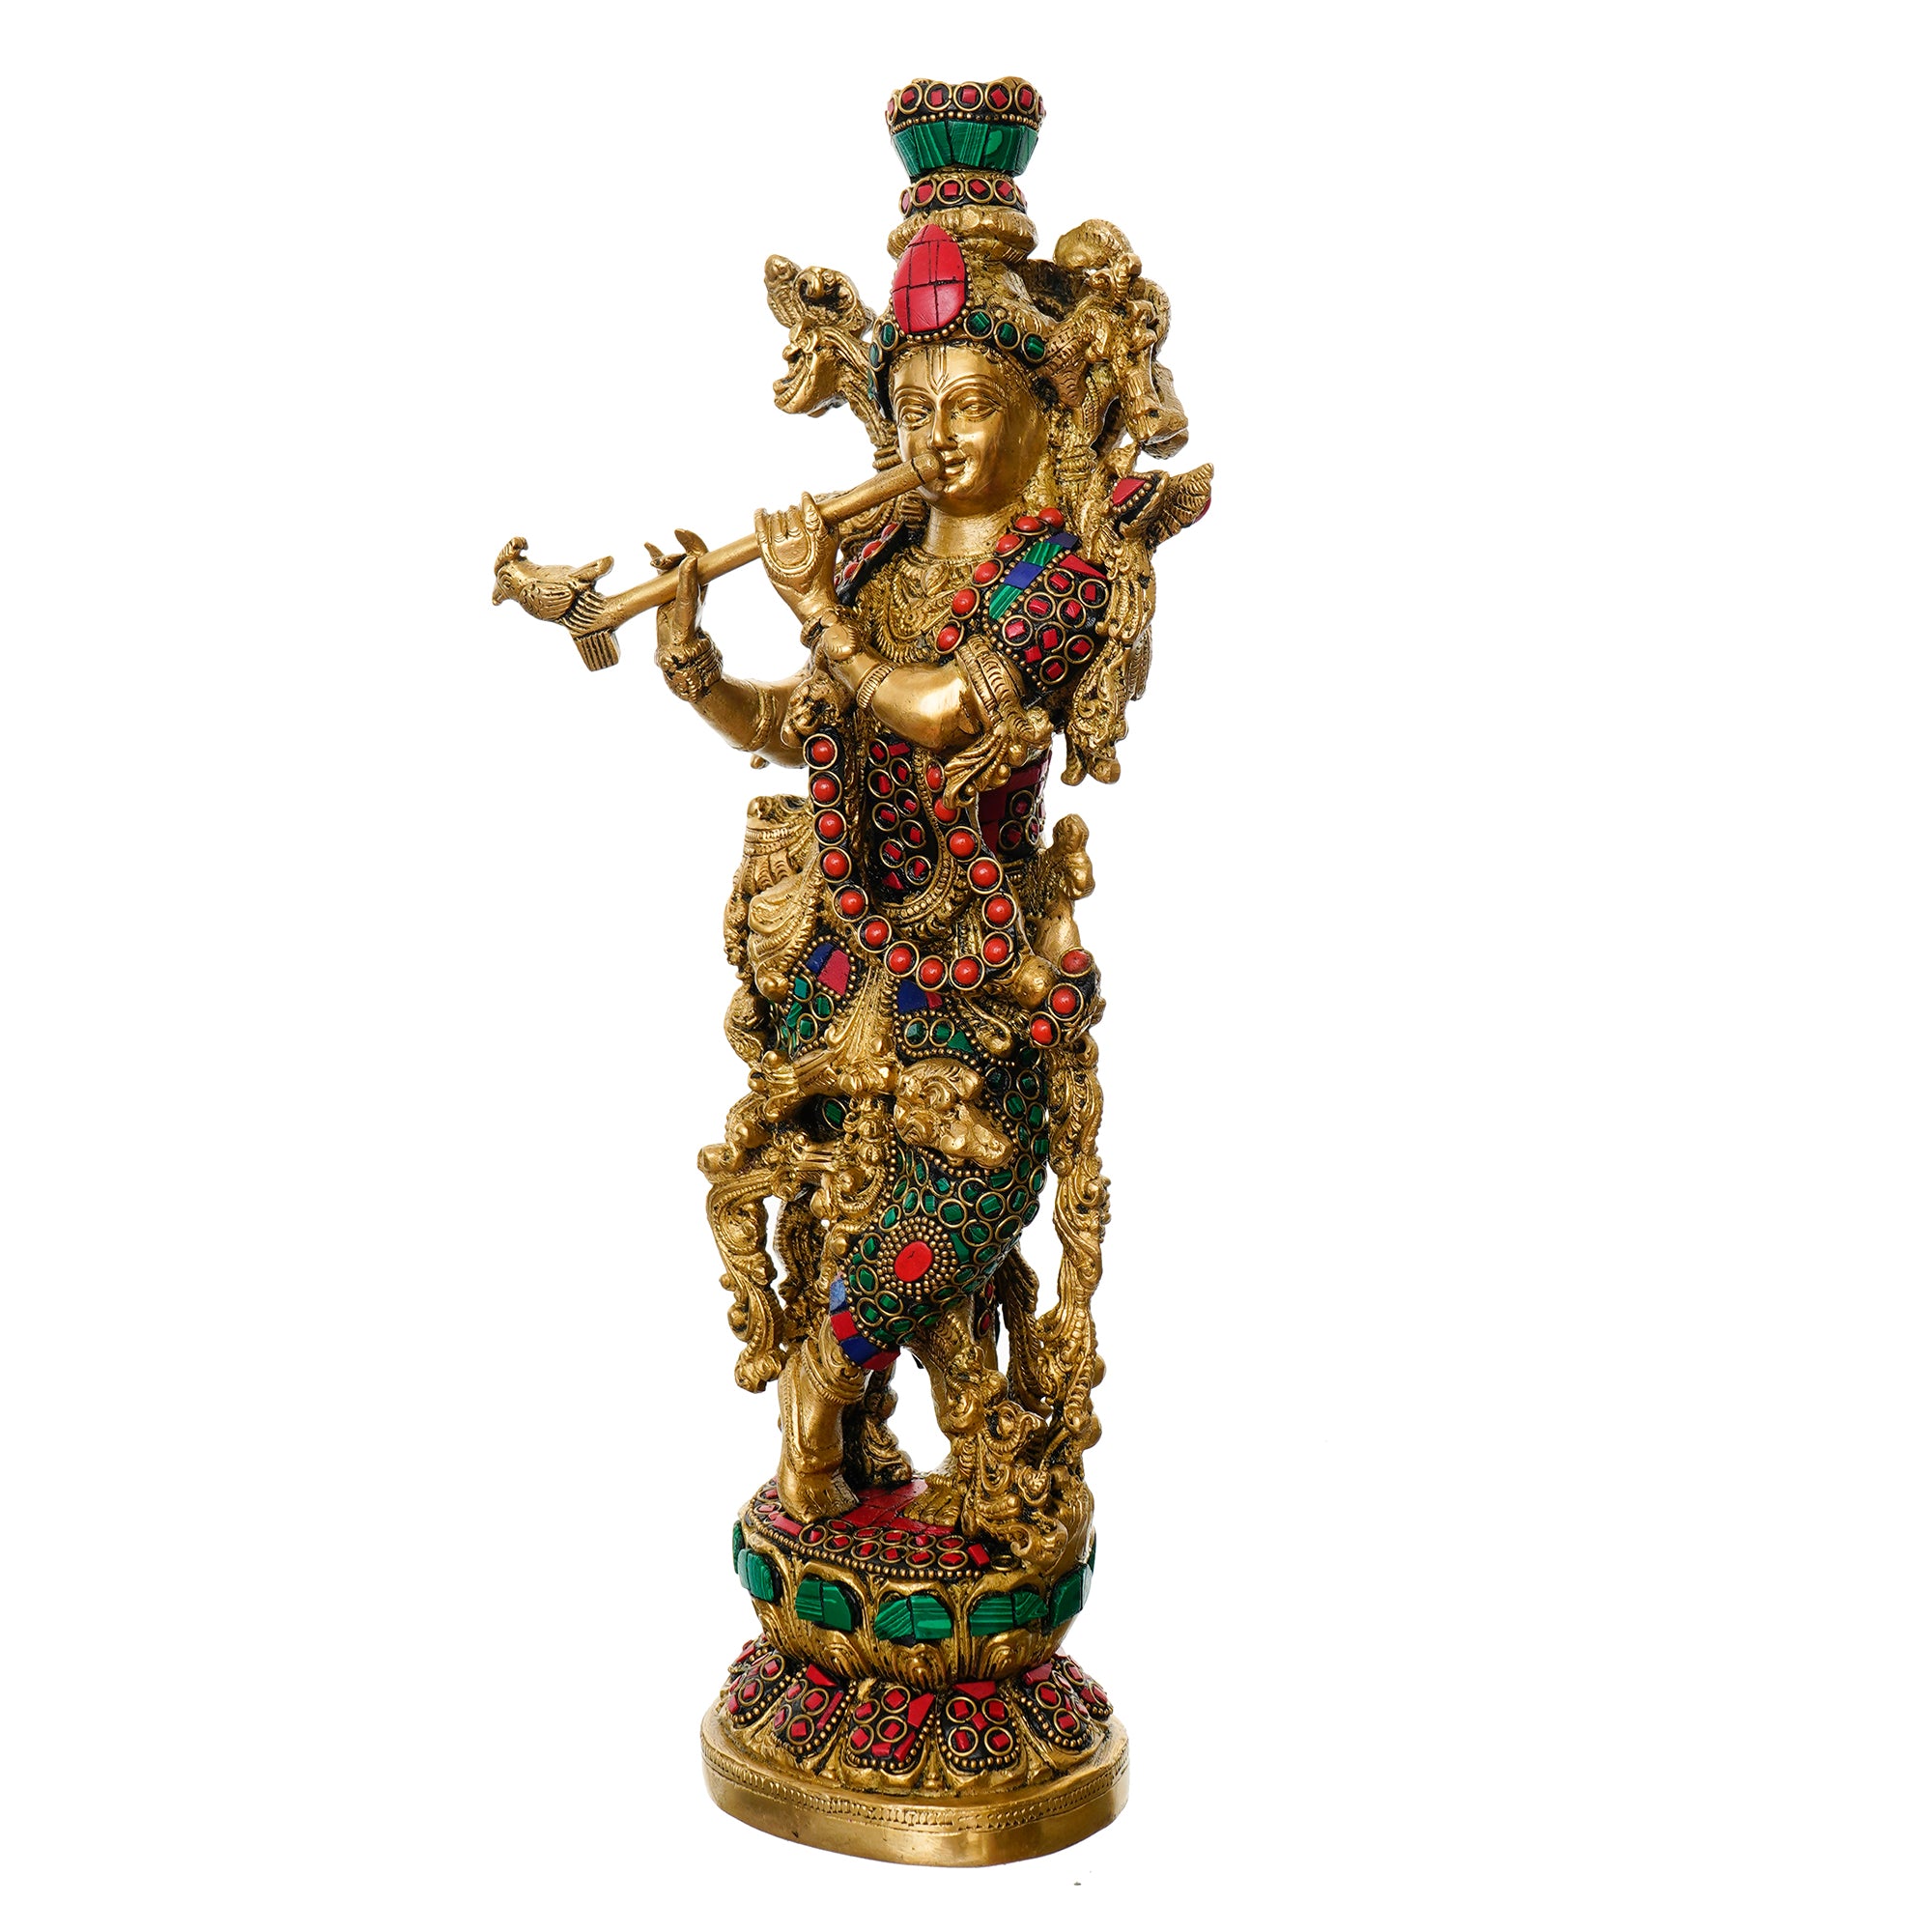 Golden Lord Krishna Playing Flute Handcrafted Brass Idol with Colorful Stone Work 4